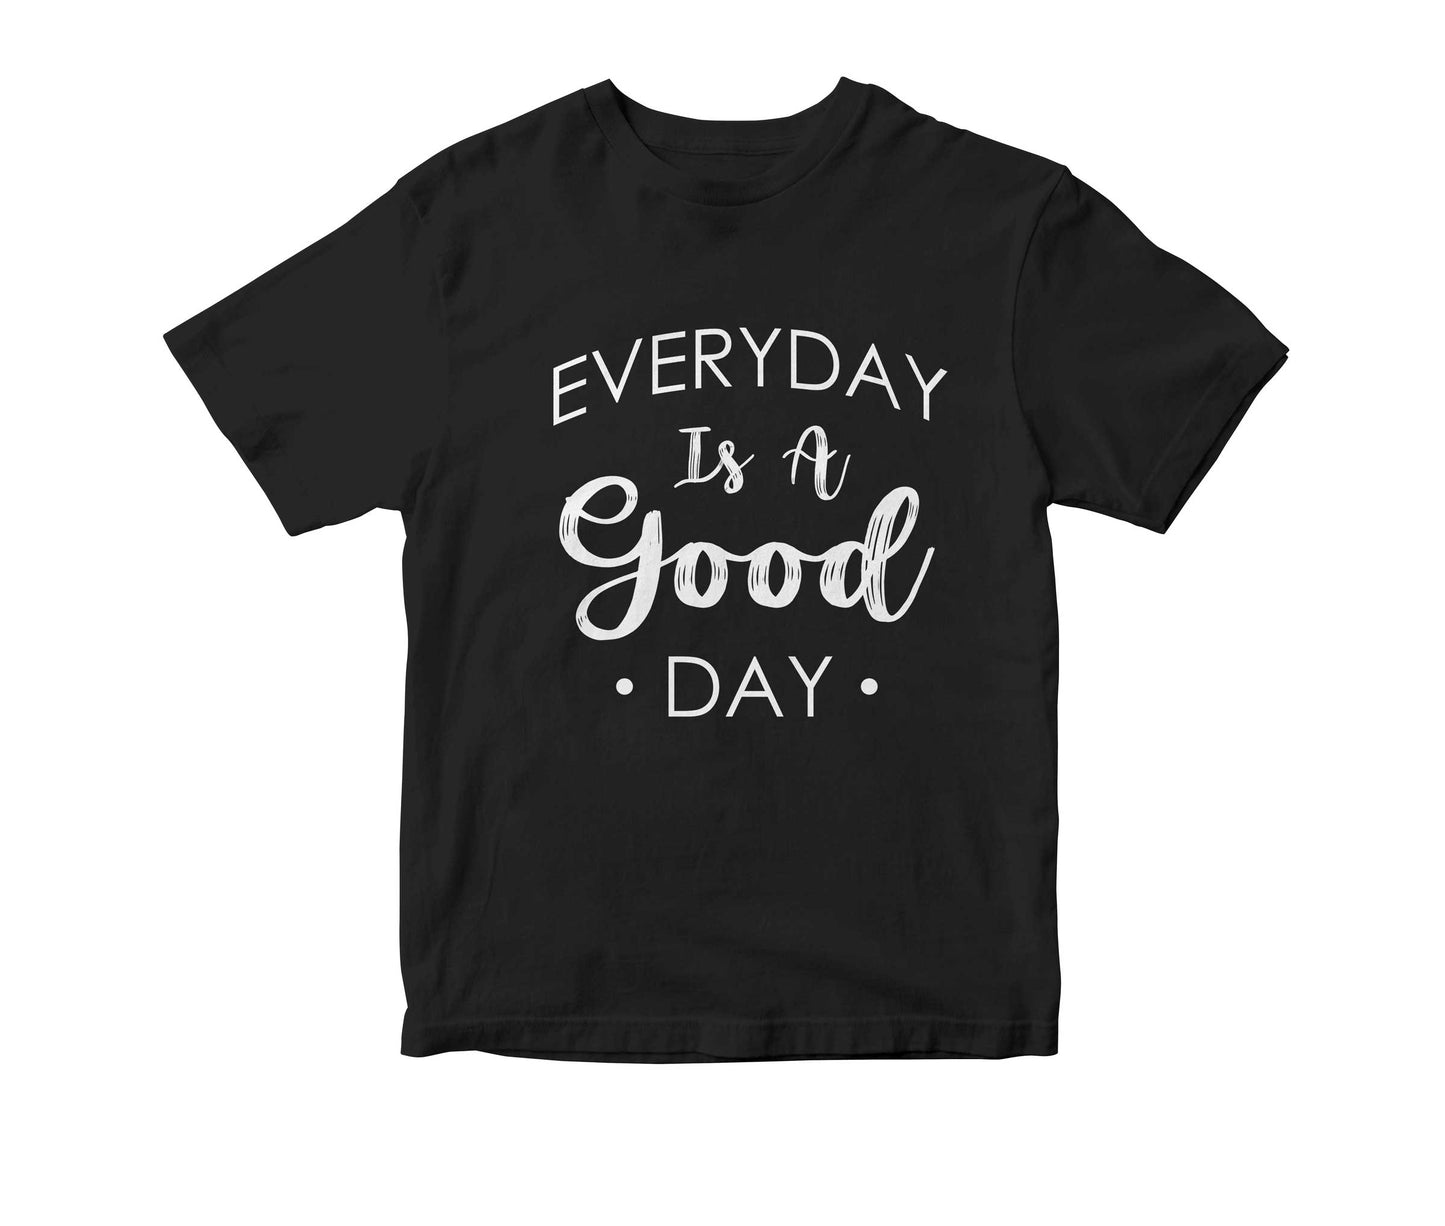 Everyday Is A Good Day Adult Unisex T-Shirt